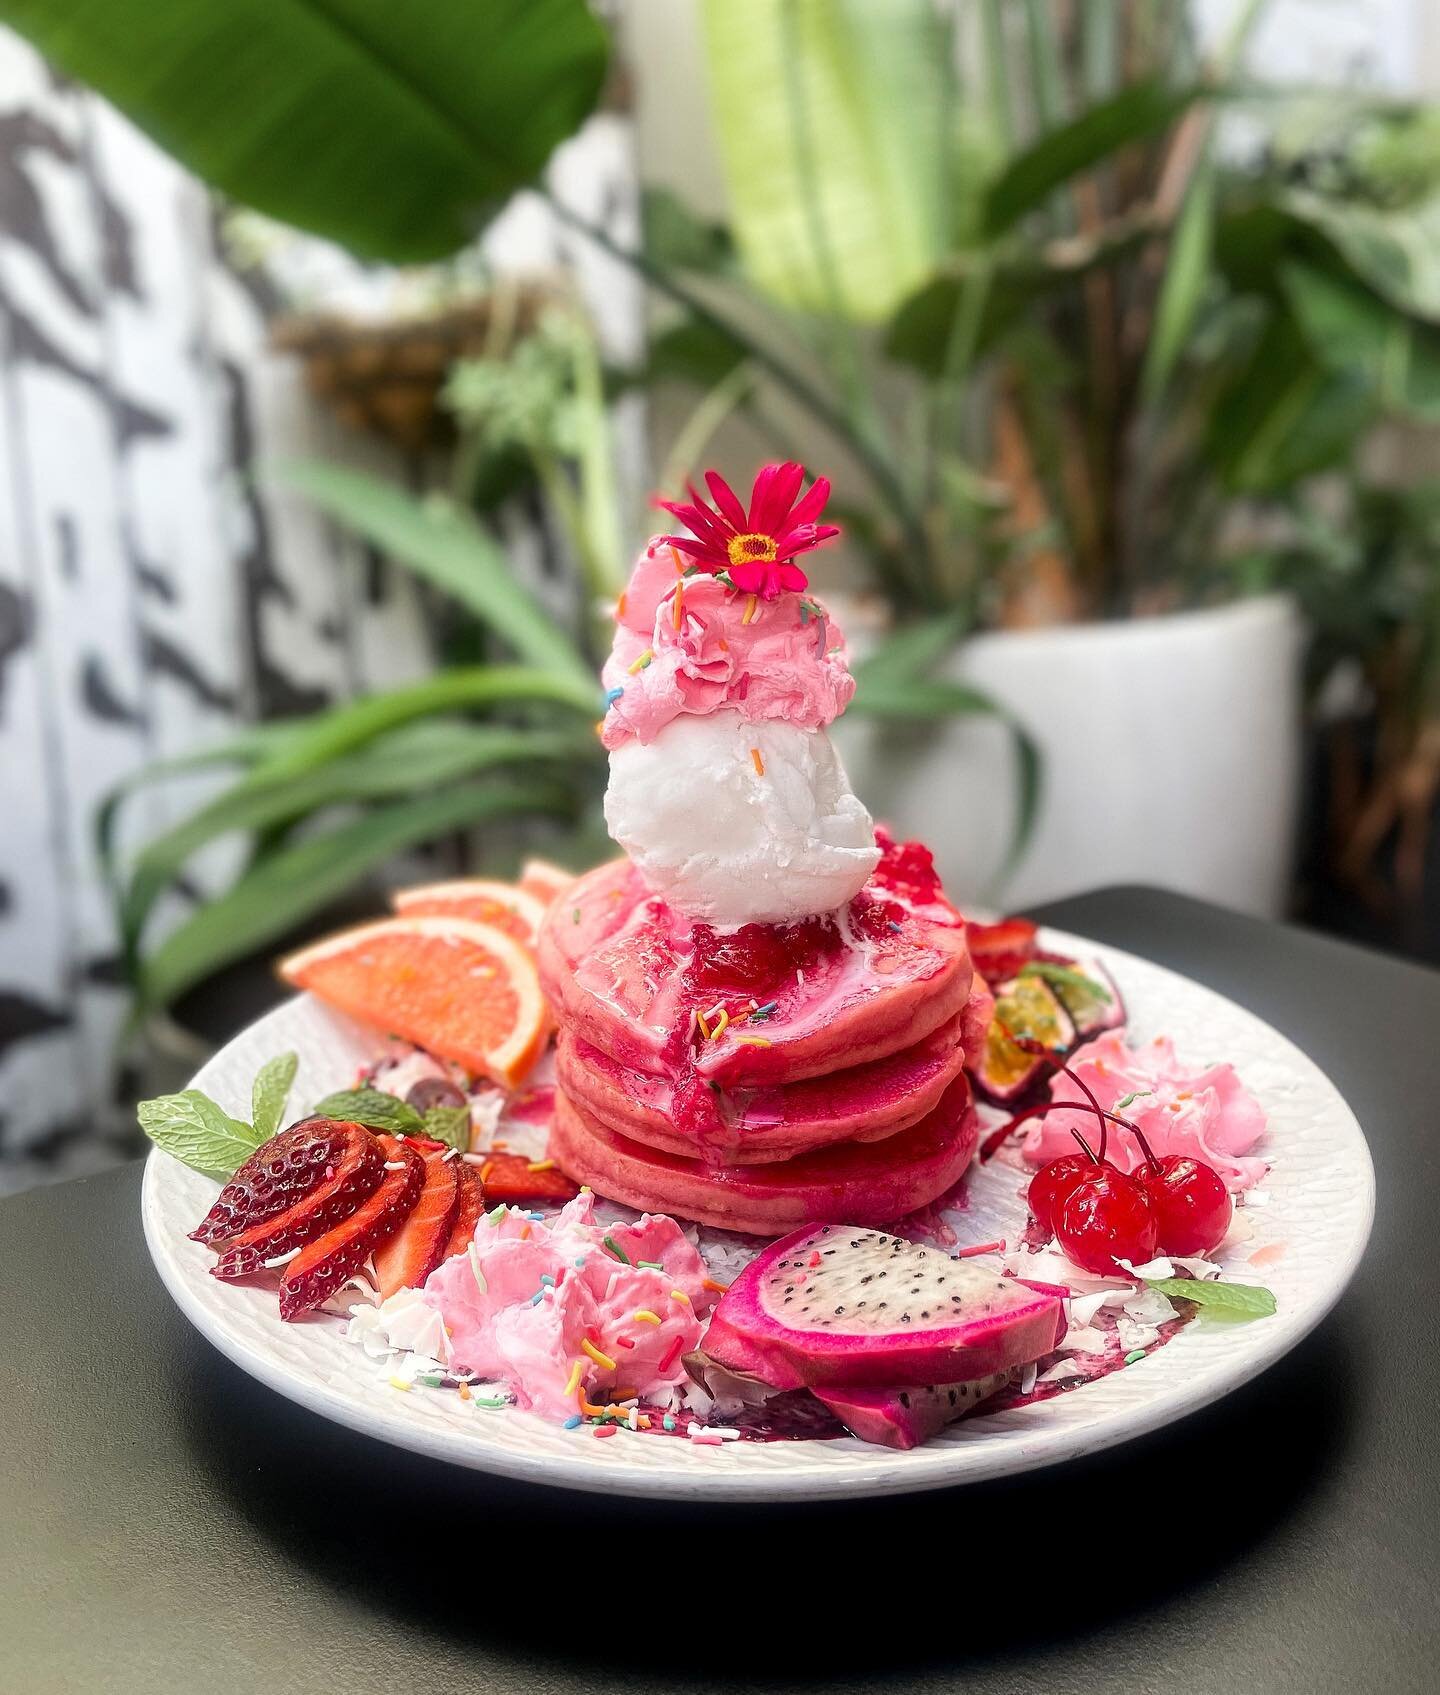 Joining the hype around everything 🎀Pink-tastic!!🎀

Introducing the new Barbie themed Alimentary Pancakes &amp; Milkshake! We have made all your Barbie dreams come true!

Ask our friendly staff about these items when you&rsquo;re in the cafe next💕